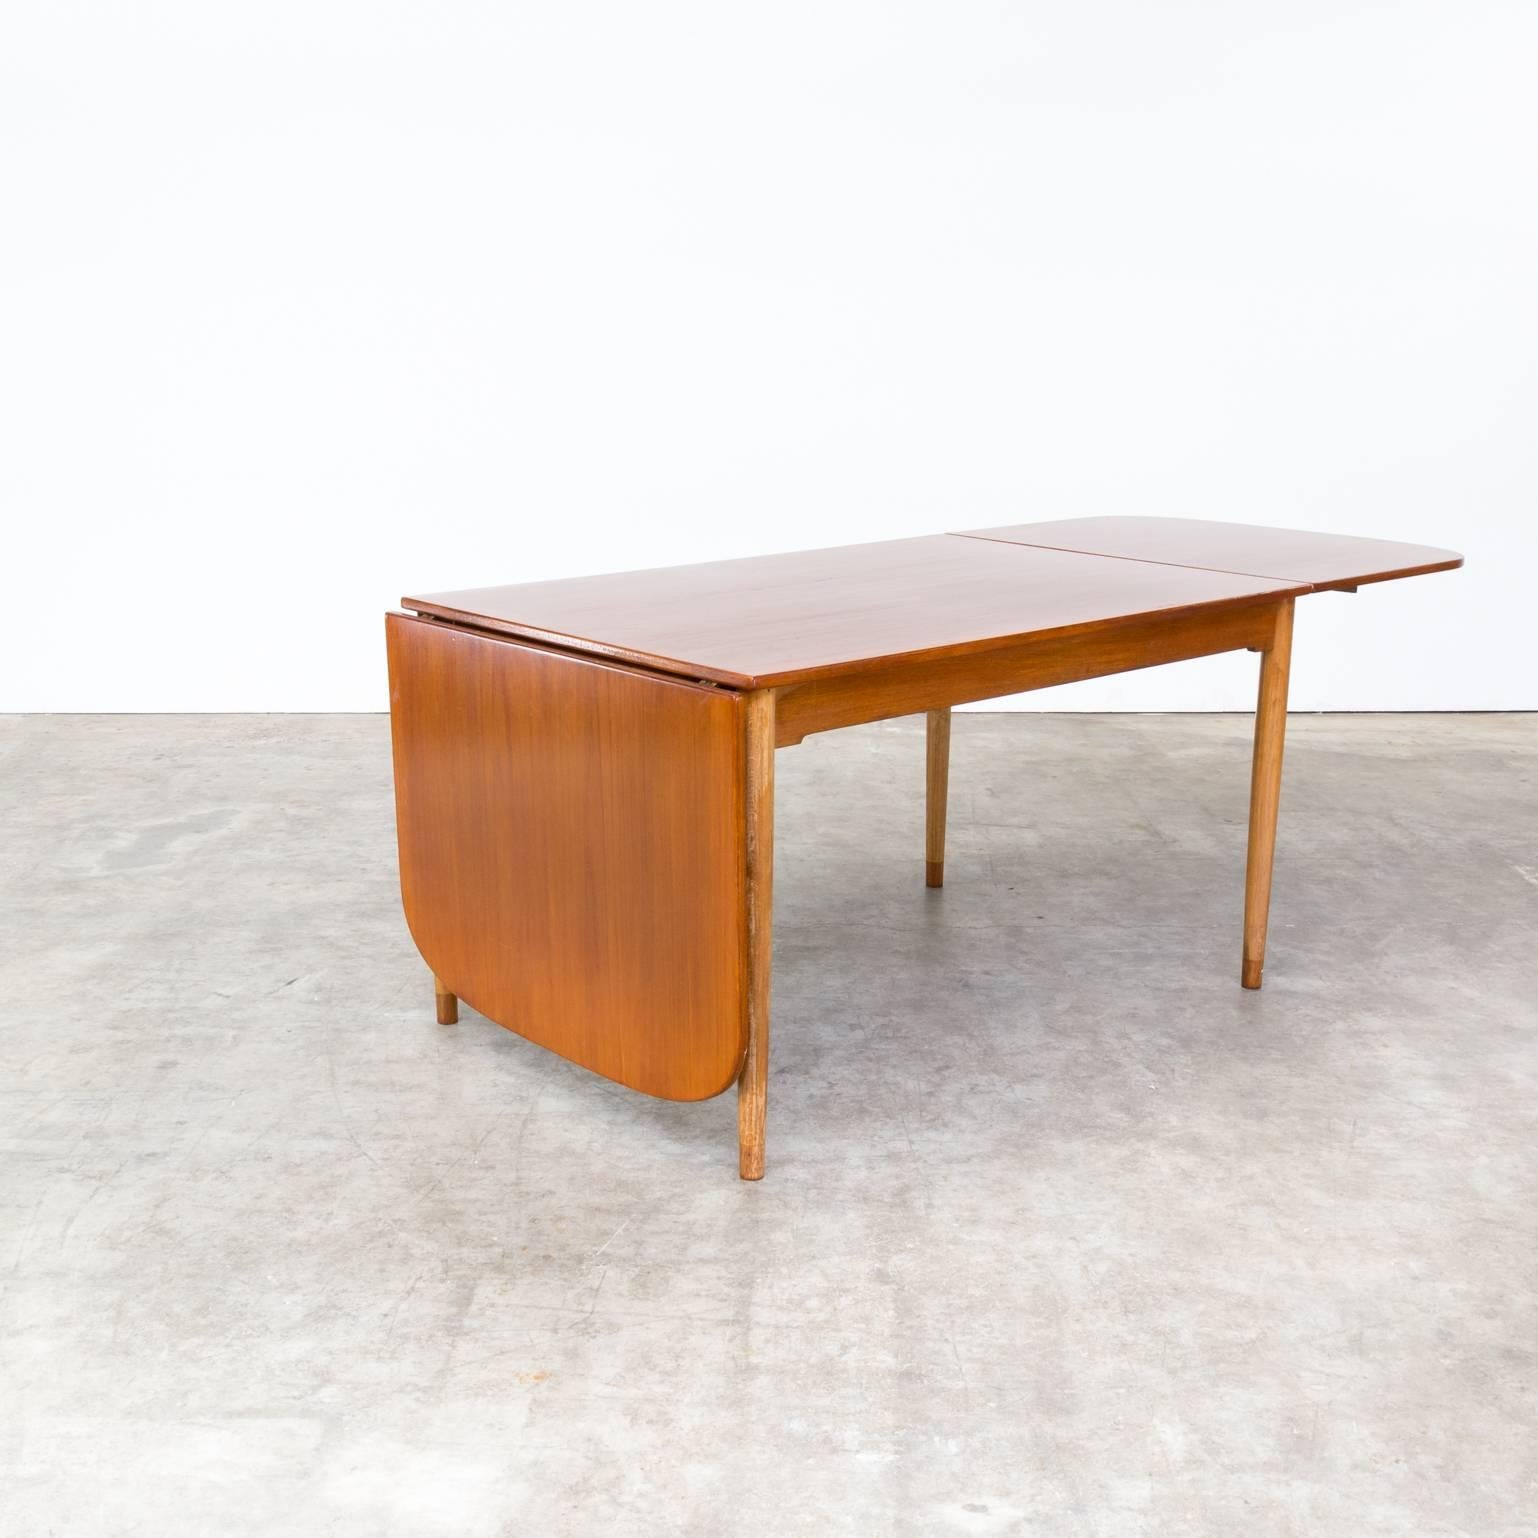 Hans Wegner beautiful rare drop leaf dining table. Very good condition consistent with age and use.